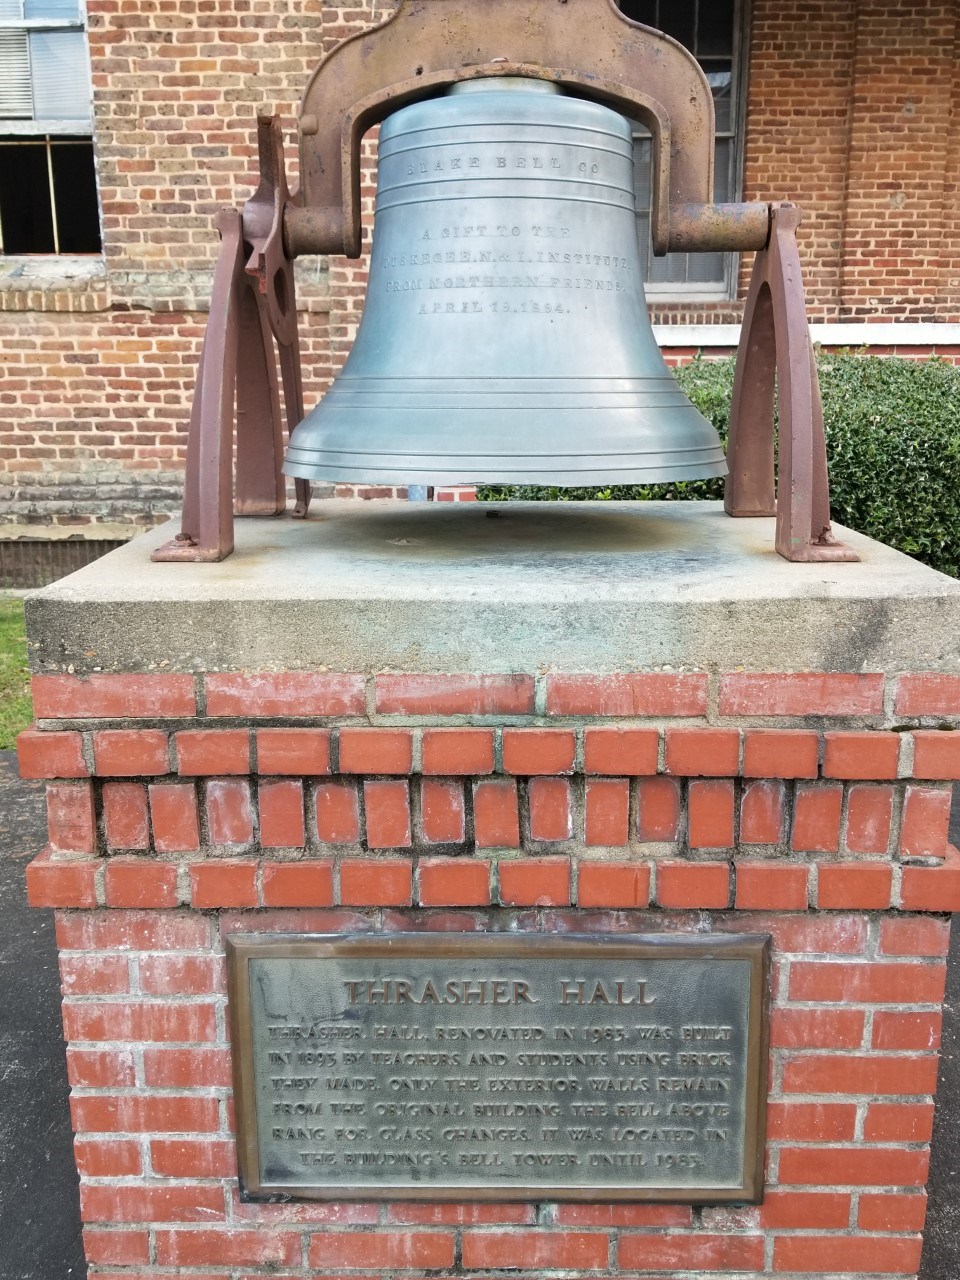 Front view of the original bell from the Thrasher Hall bell tower.The original bell that was housed in the bell tower of Thrasher Hall. There is a plaque explaining a brief history of the bell.